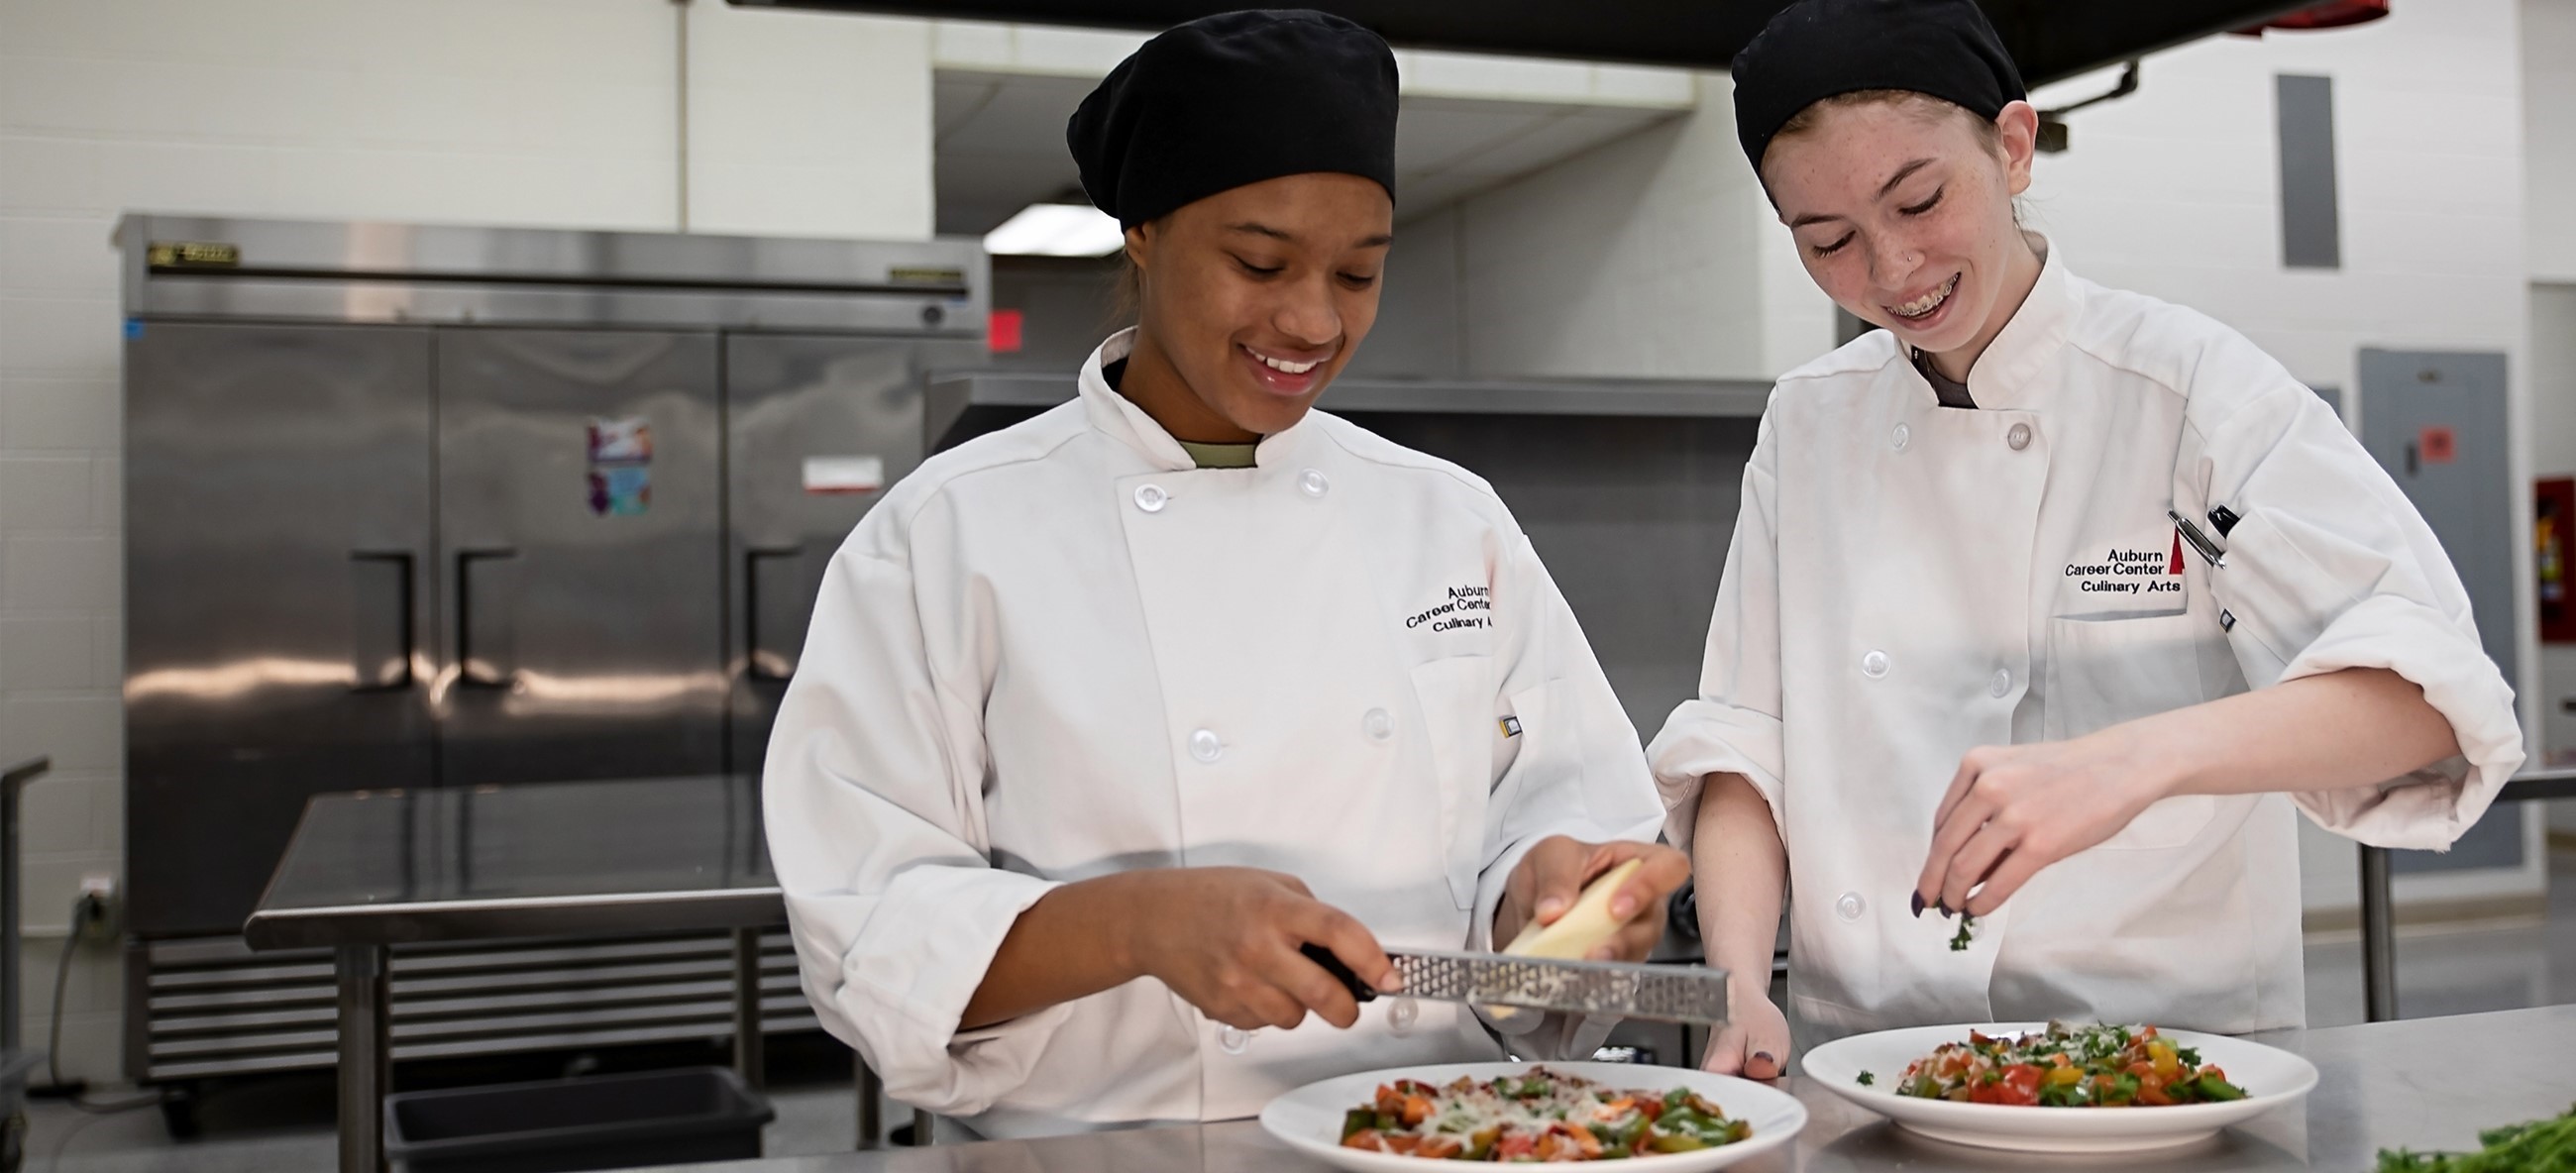 Two culinary students smiling and garnishing dishes